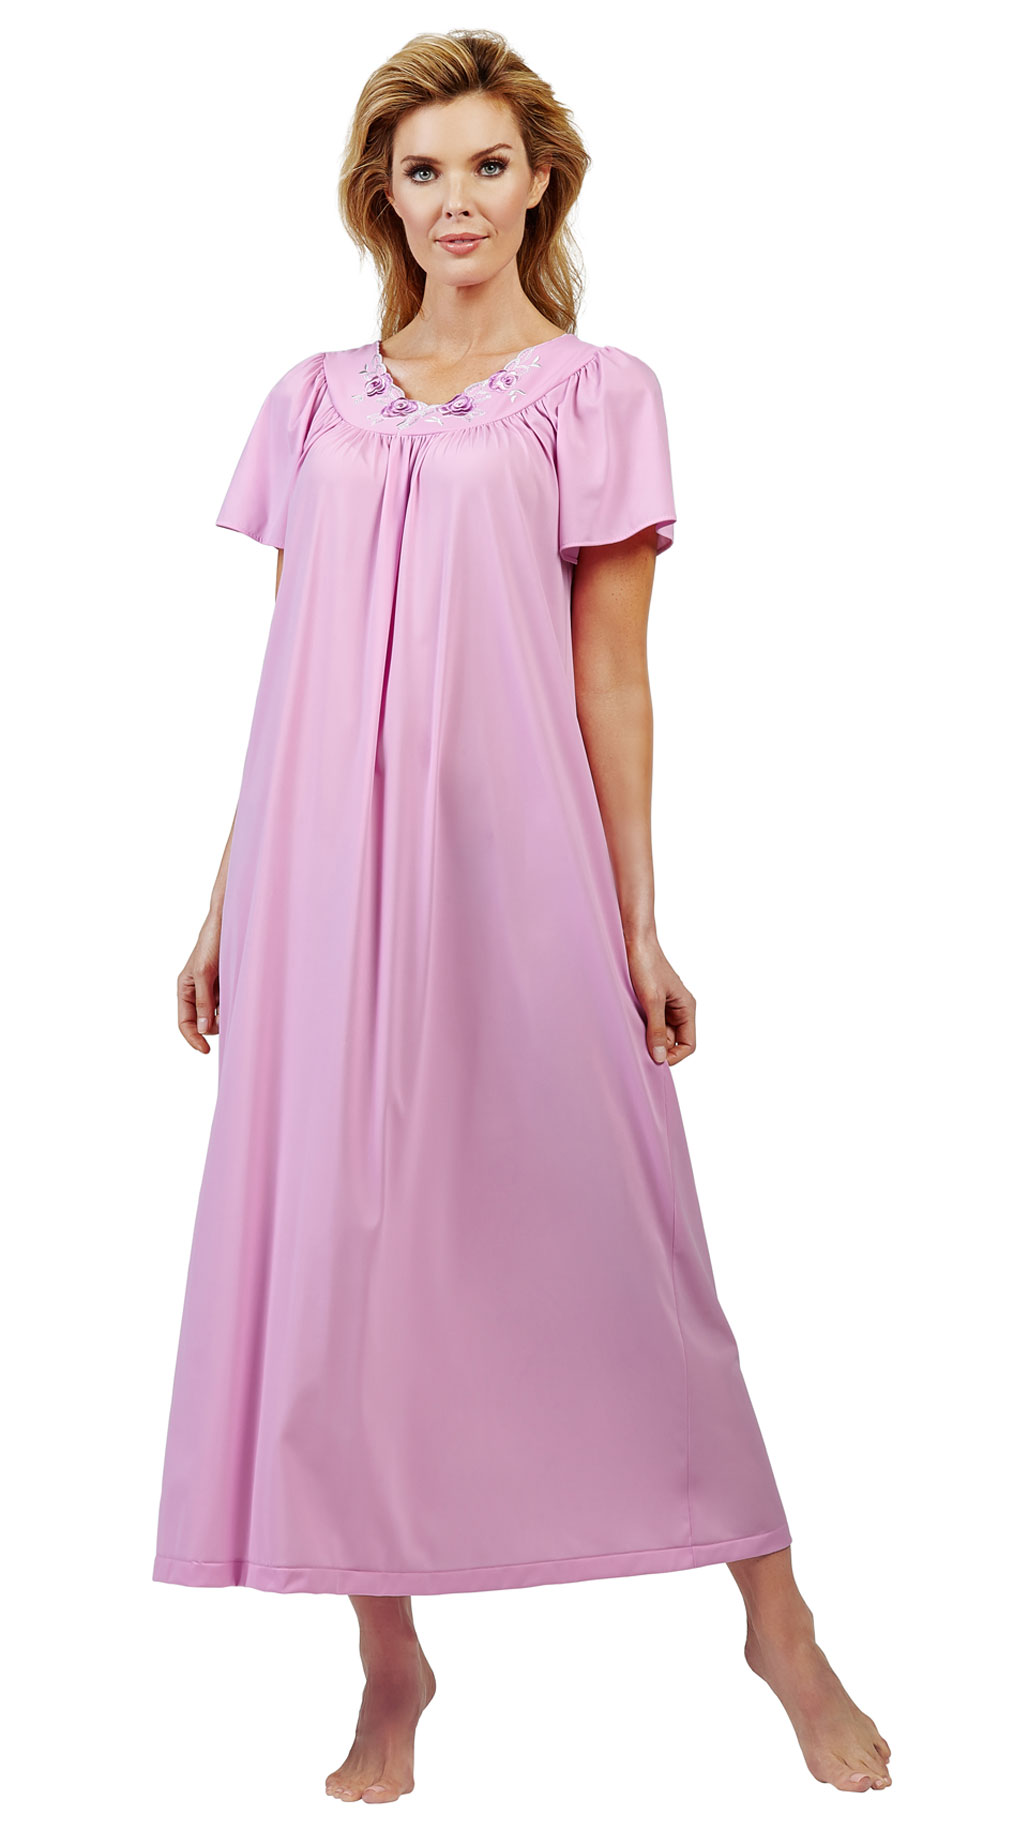 womens plus size night gowns